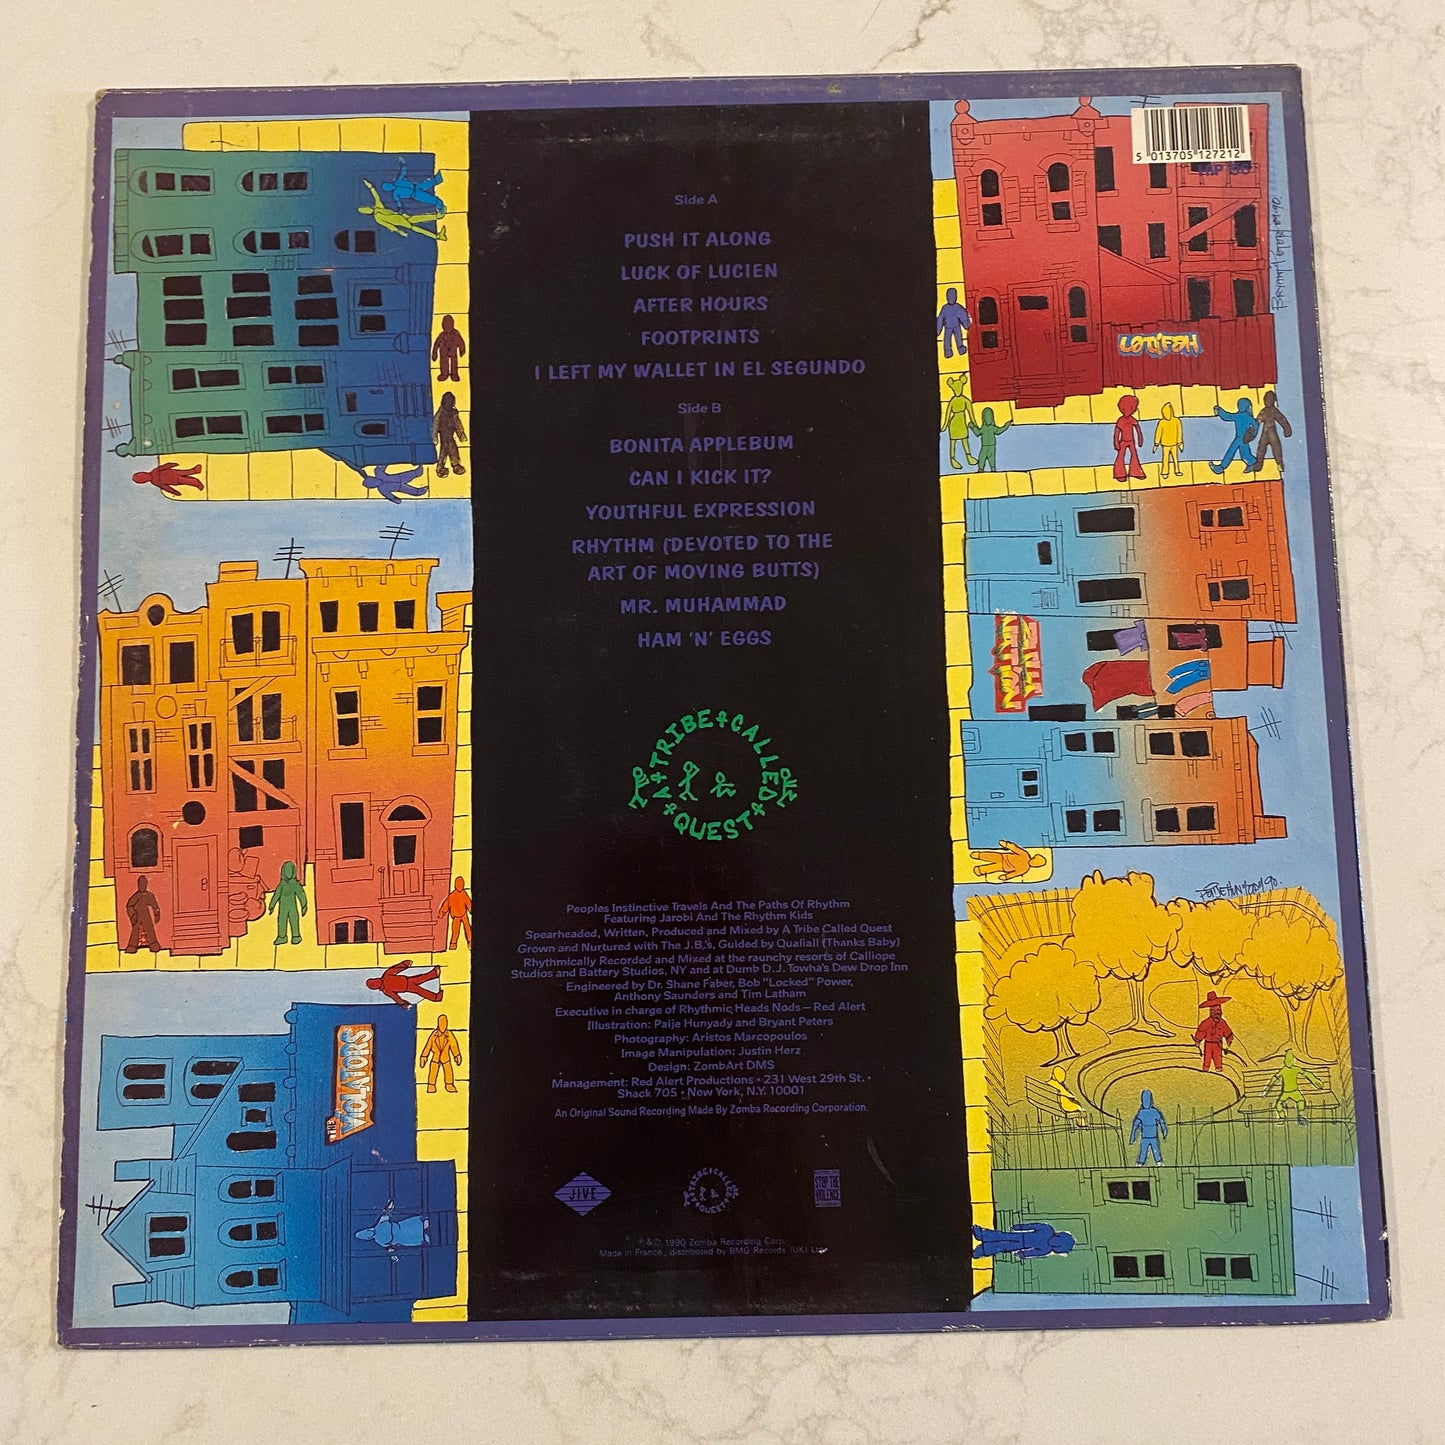 A Tribe Called Quest - People's Instinctive Travels And The Paths Of Rhythm (LP, Album) (L)